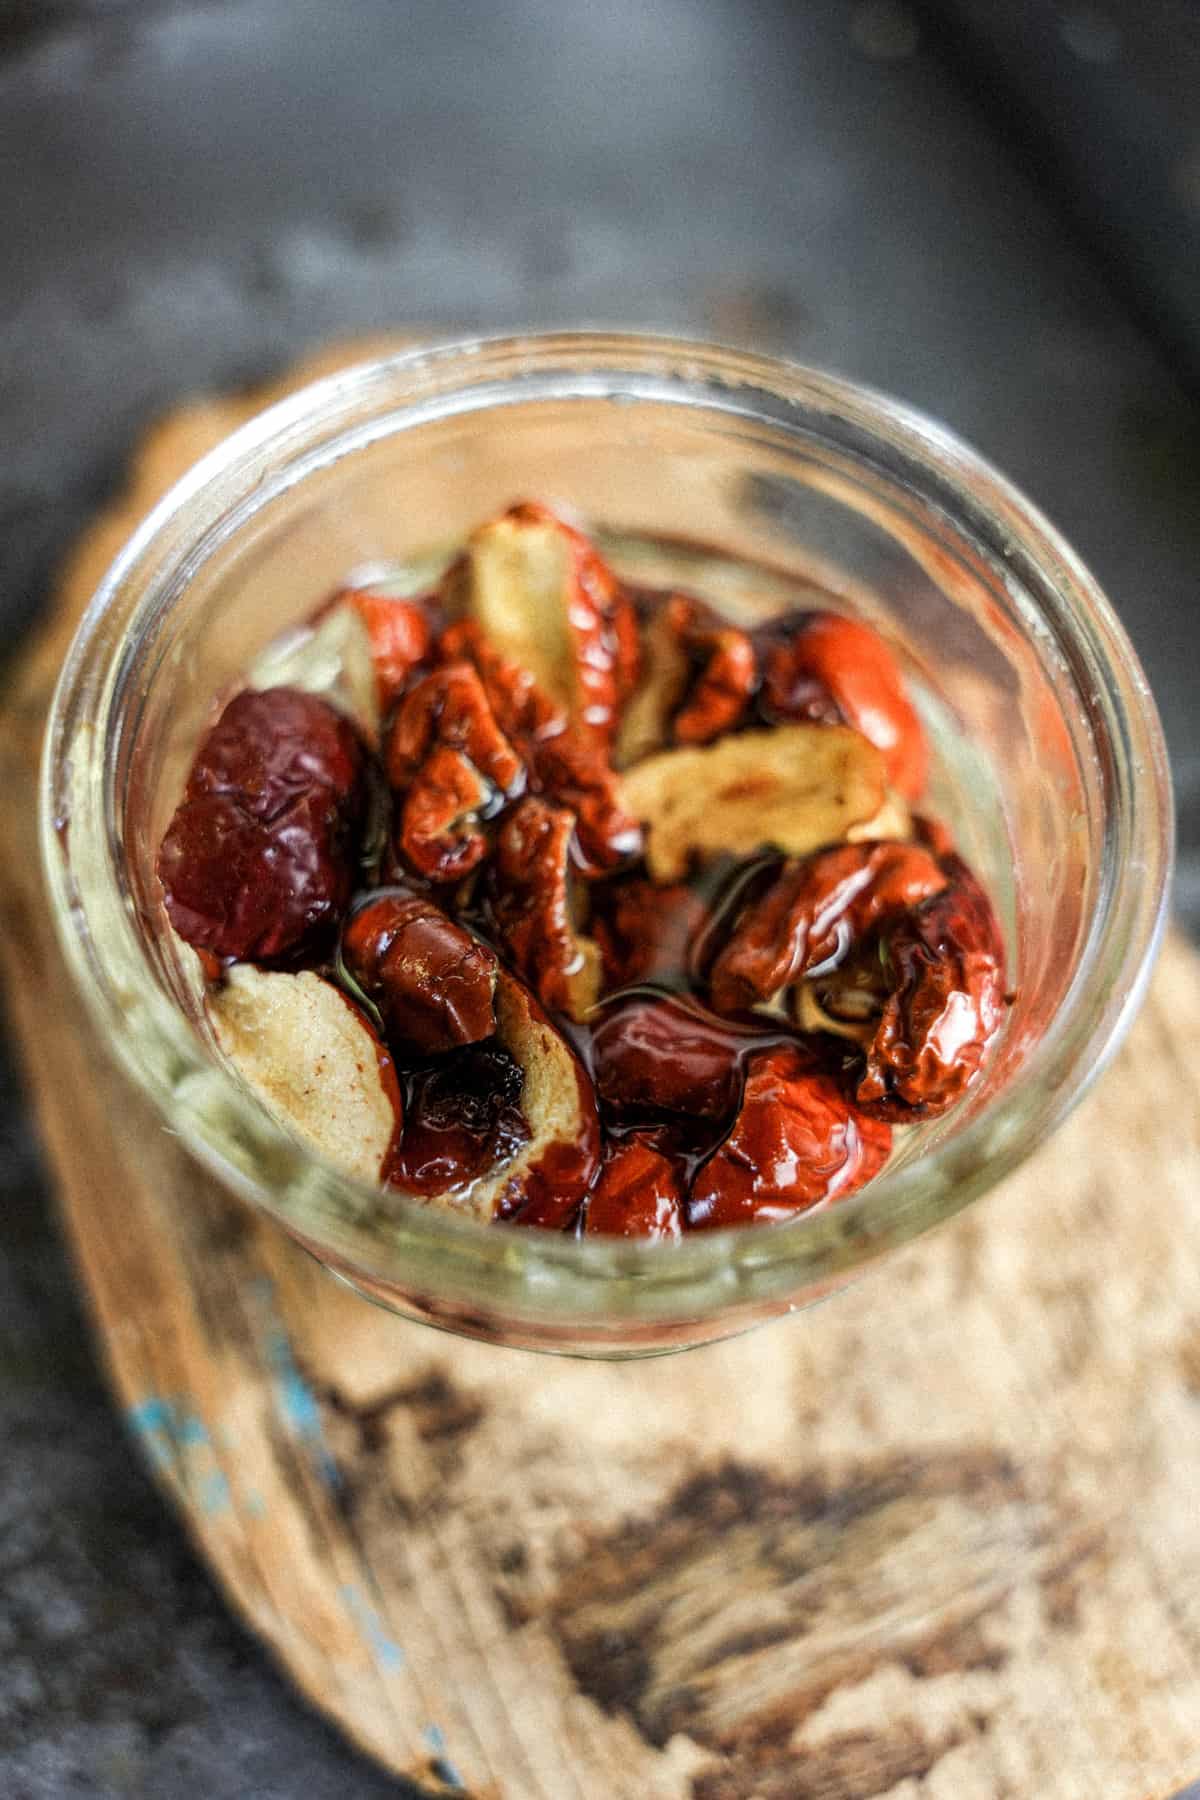 Red jujube dates soaking in a glass over a piece of wood.